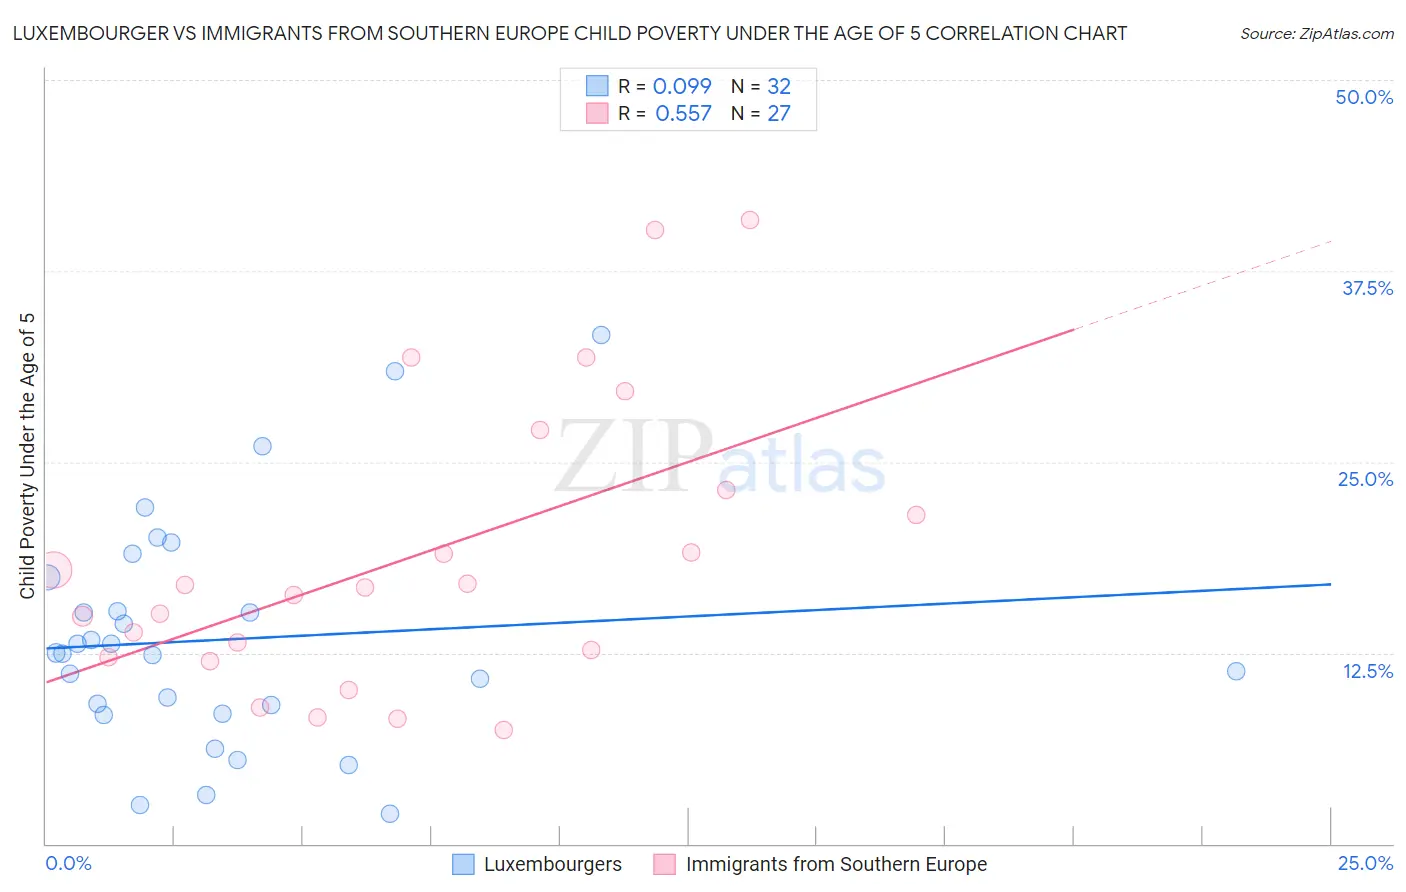 Luxembourger vs Immigrants from Southern Europe Child Poverty Under the Age of 5